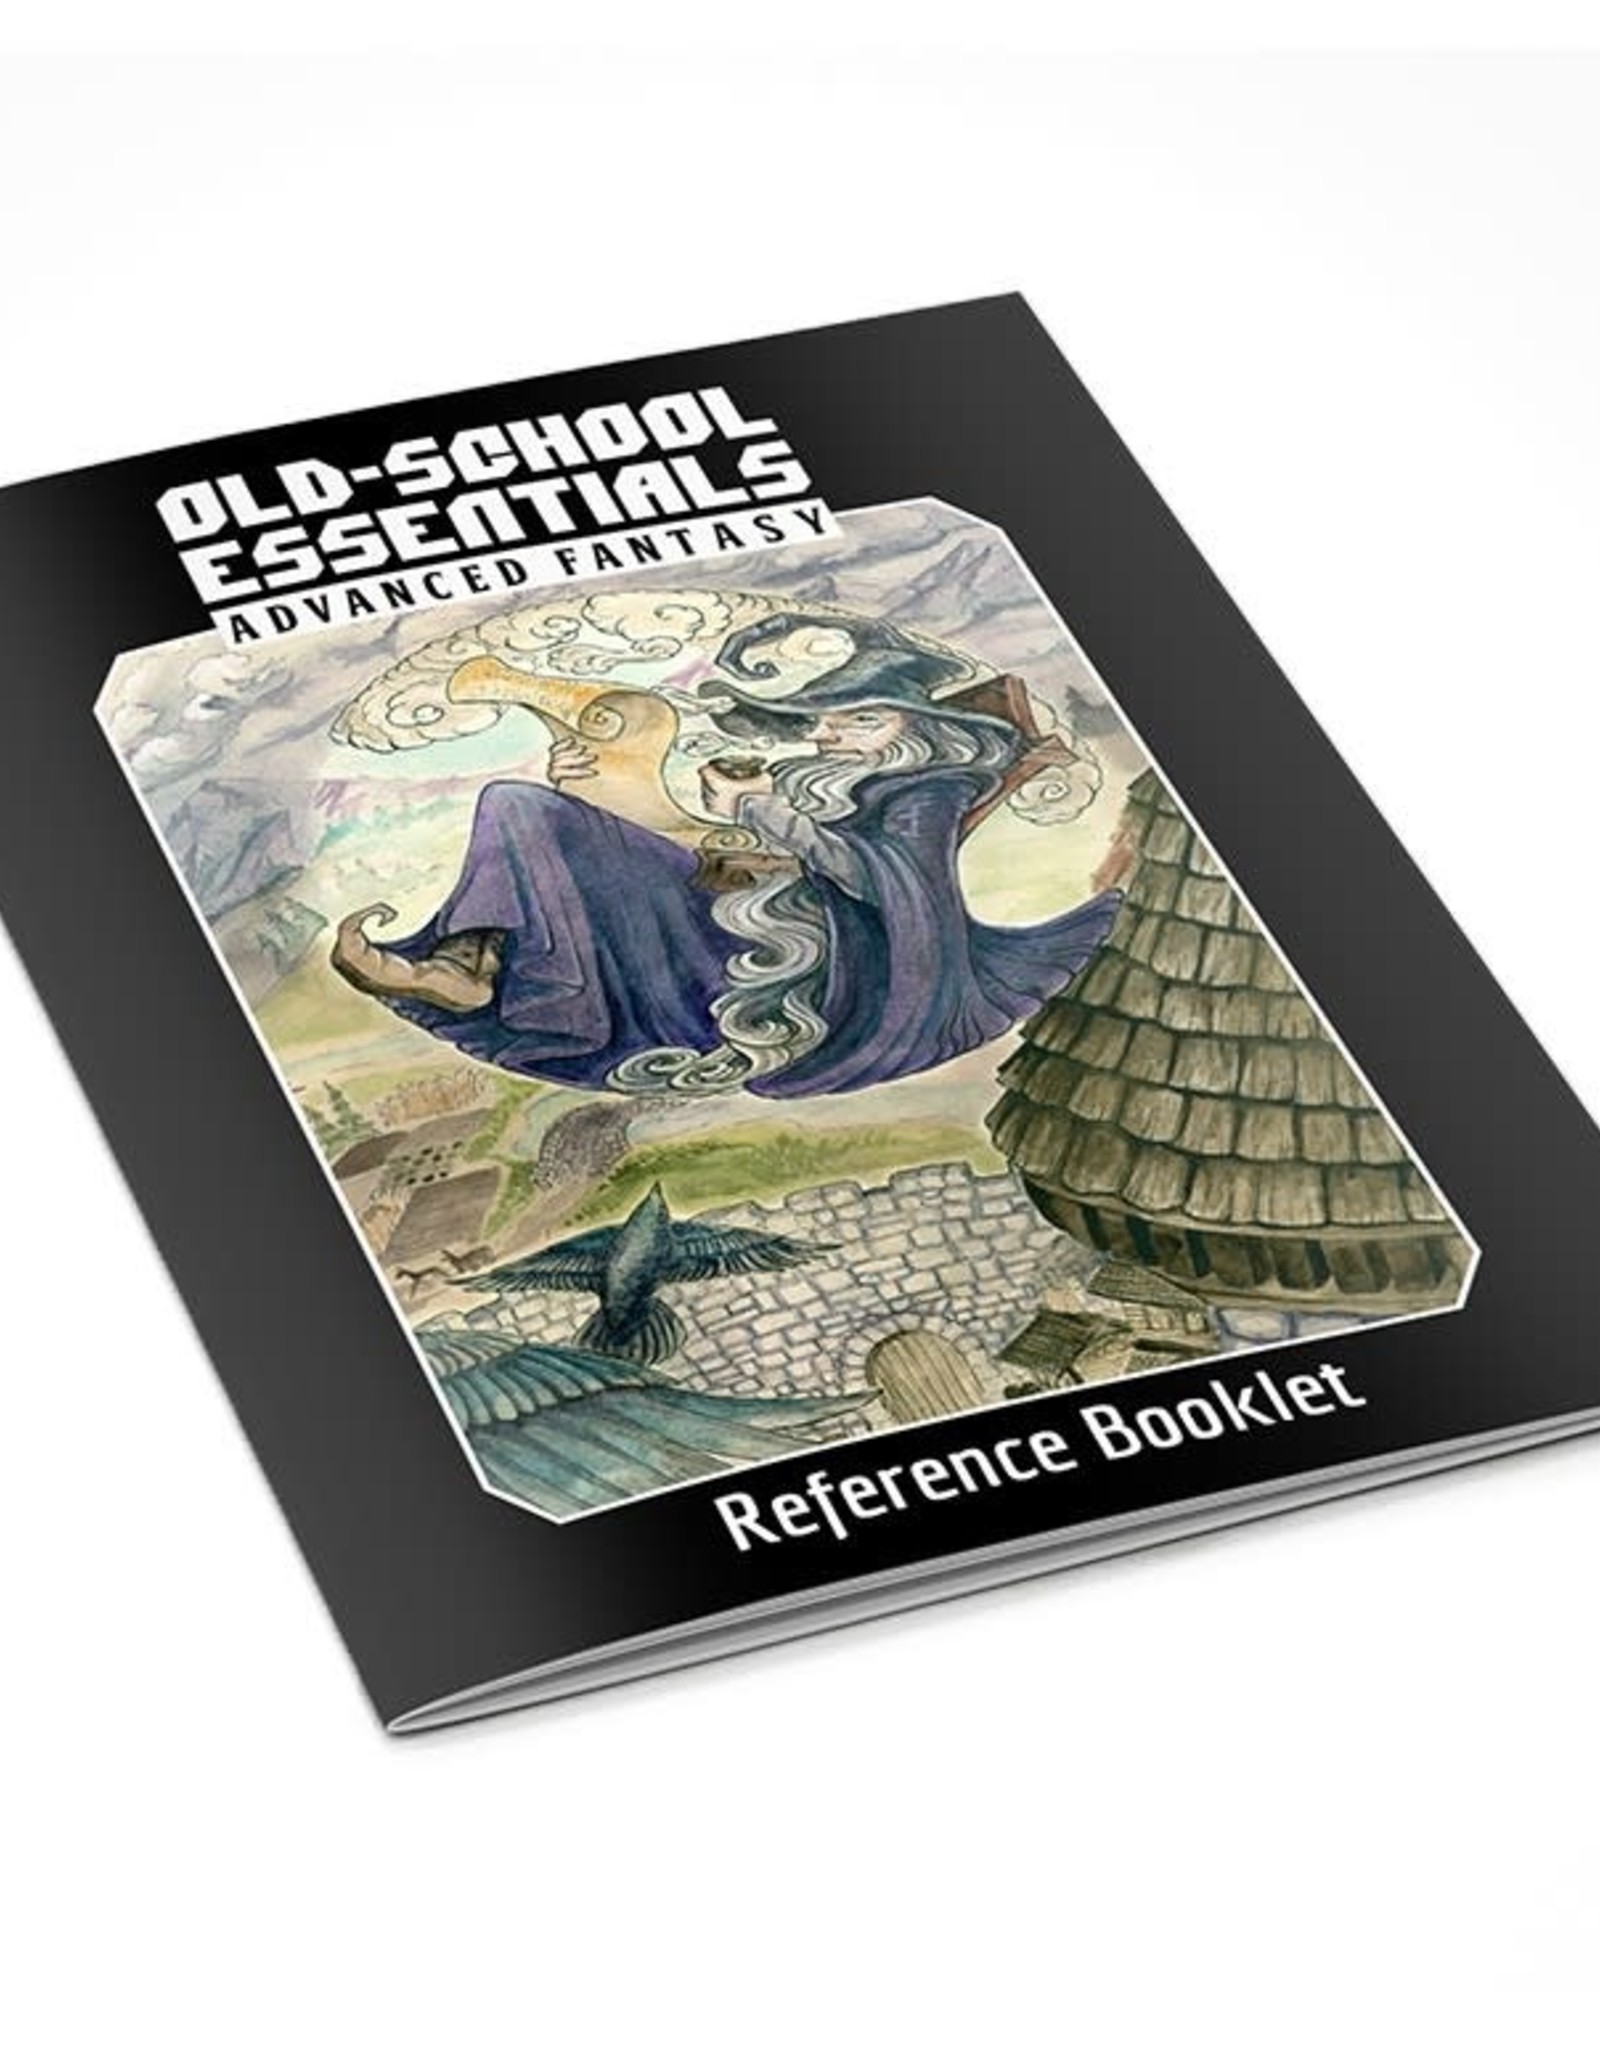 Exalted Funeral Press Old-School Essentials: Advanced Fantasy Reference Booklet